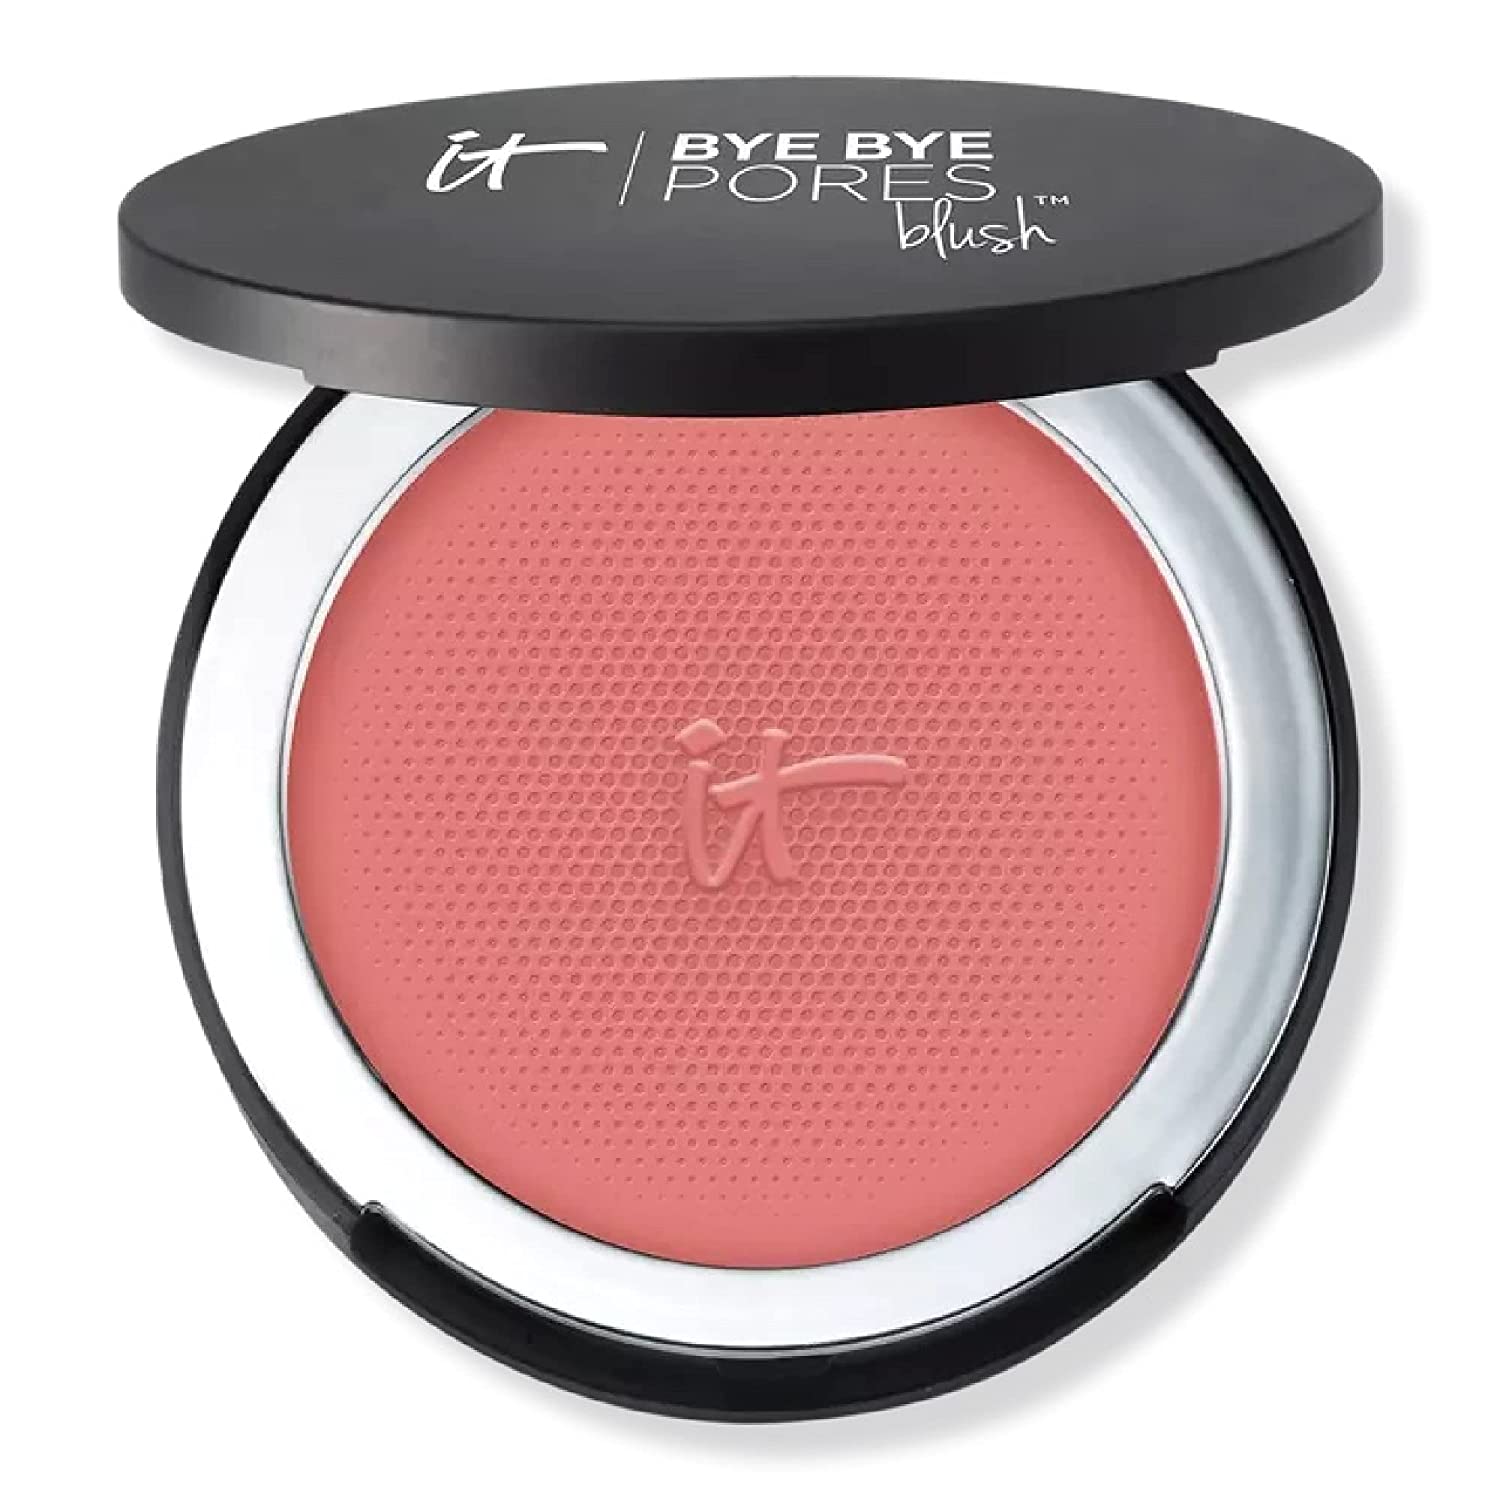 ''IT COSMETICS Bye Bye Pores Blush, Naturally Pretty - Sheer, Buildable Color - Diffuses the Look of 